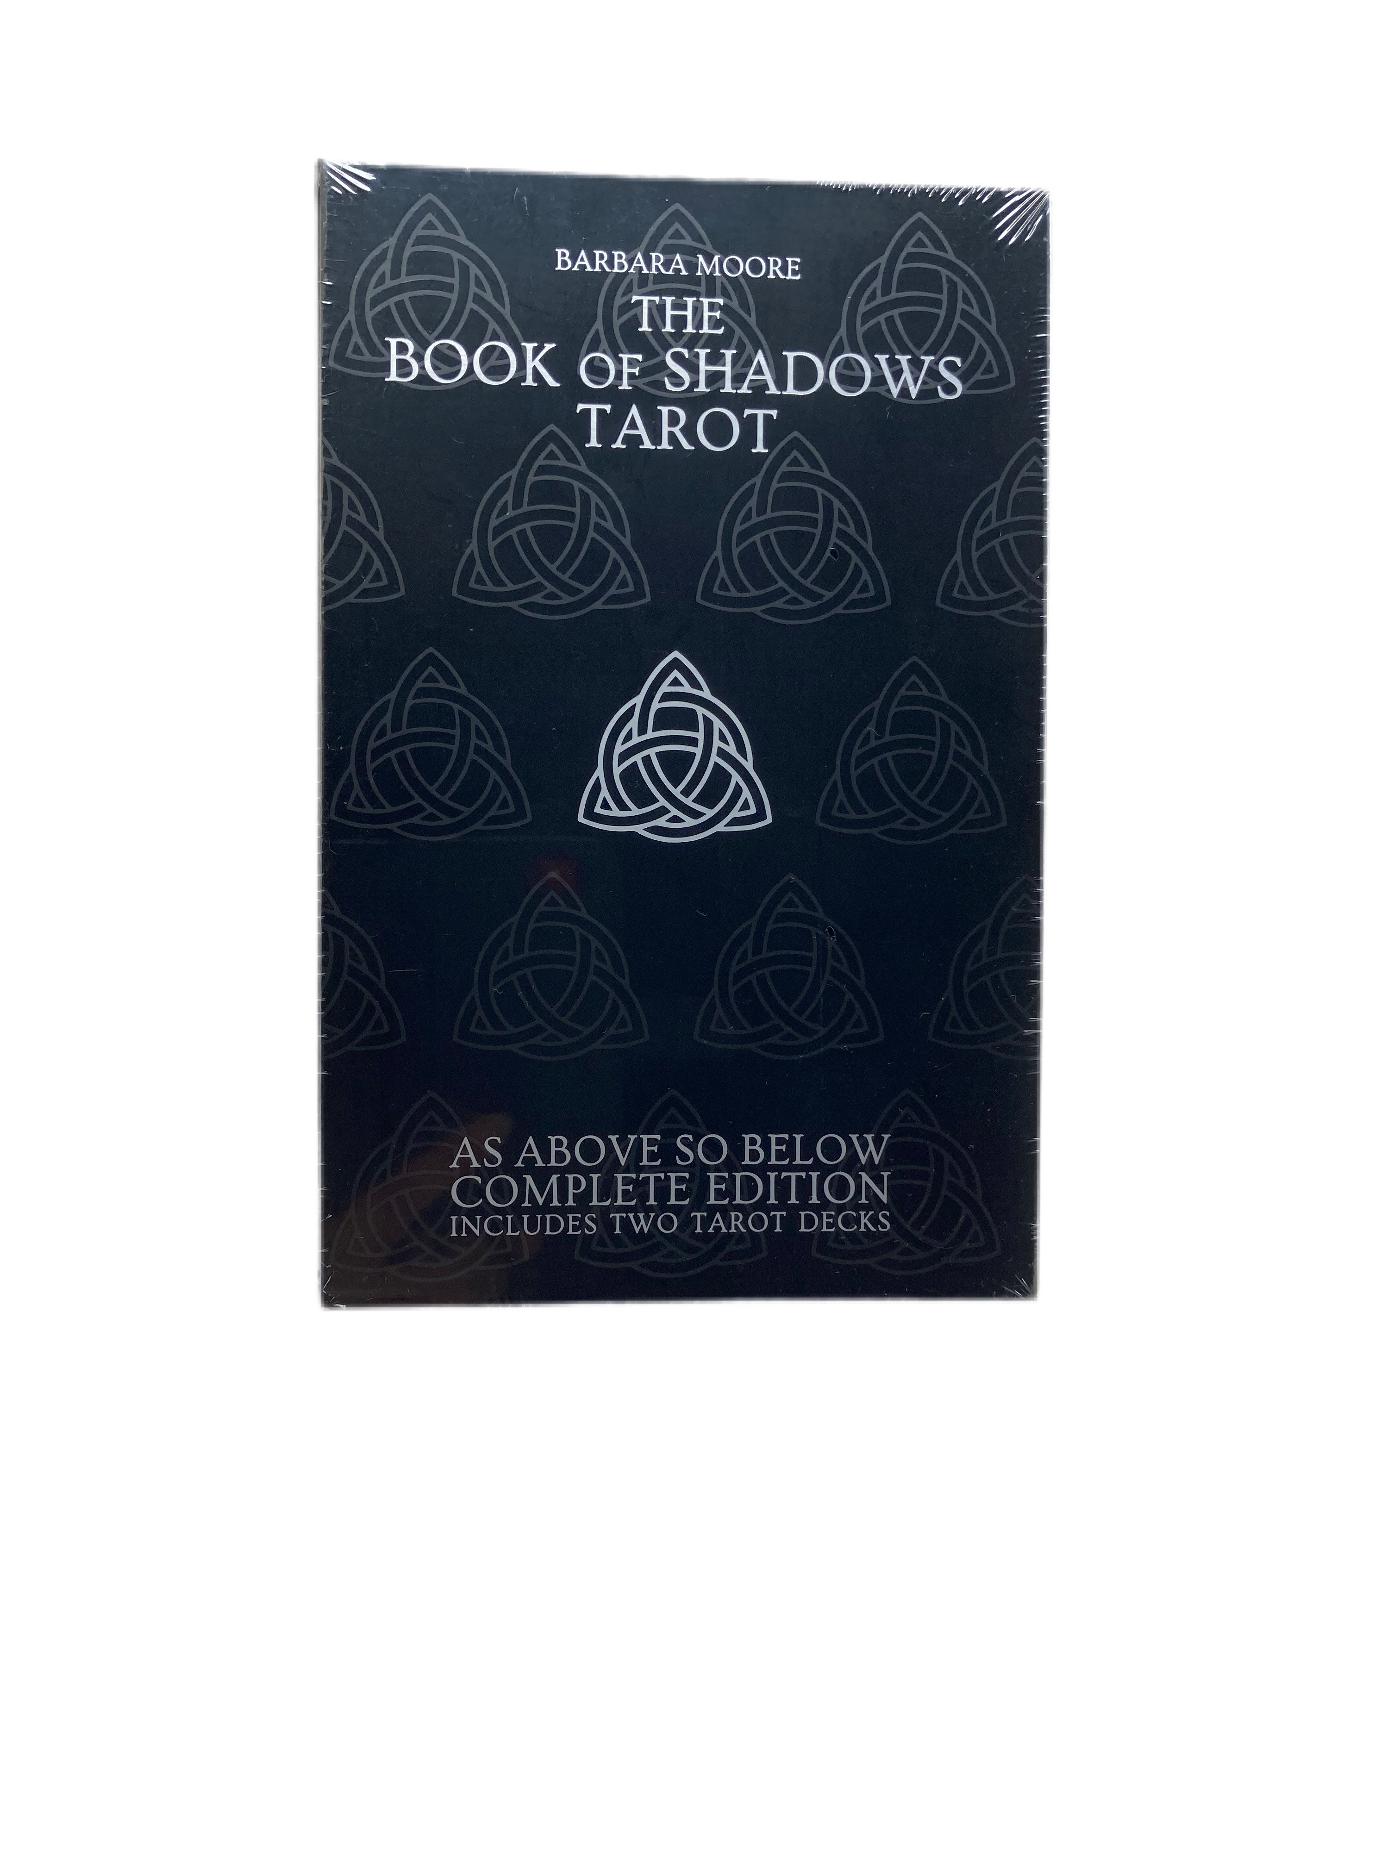 The Book of Shadows Tarot complete Edition